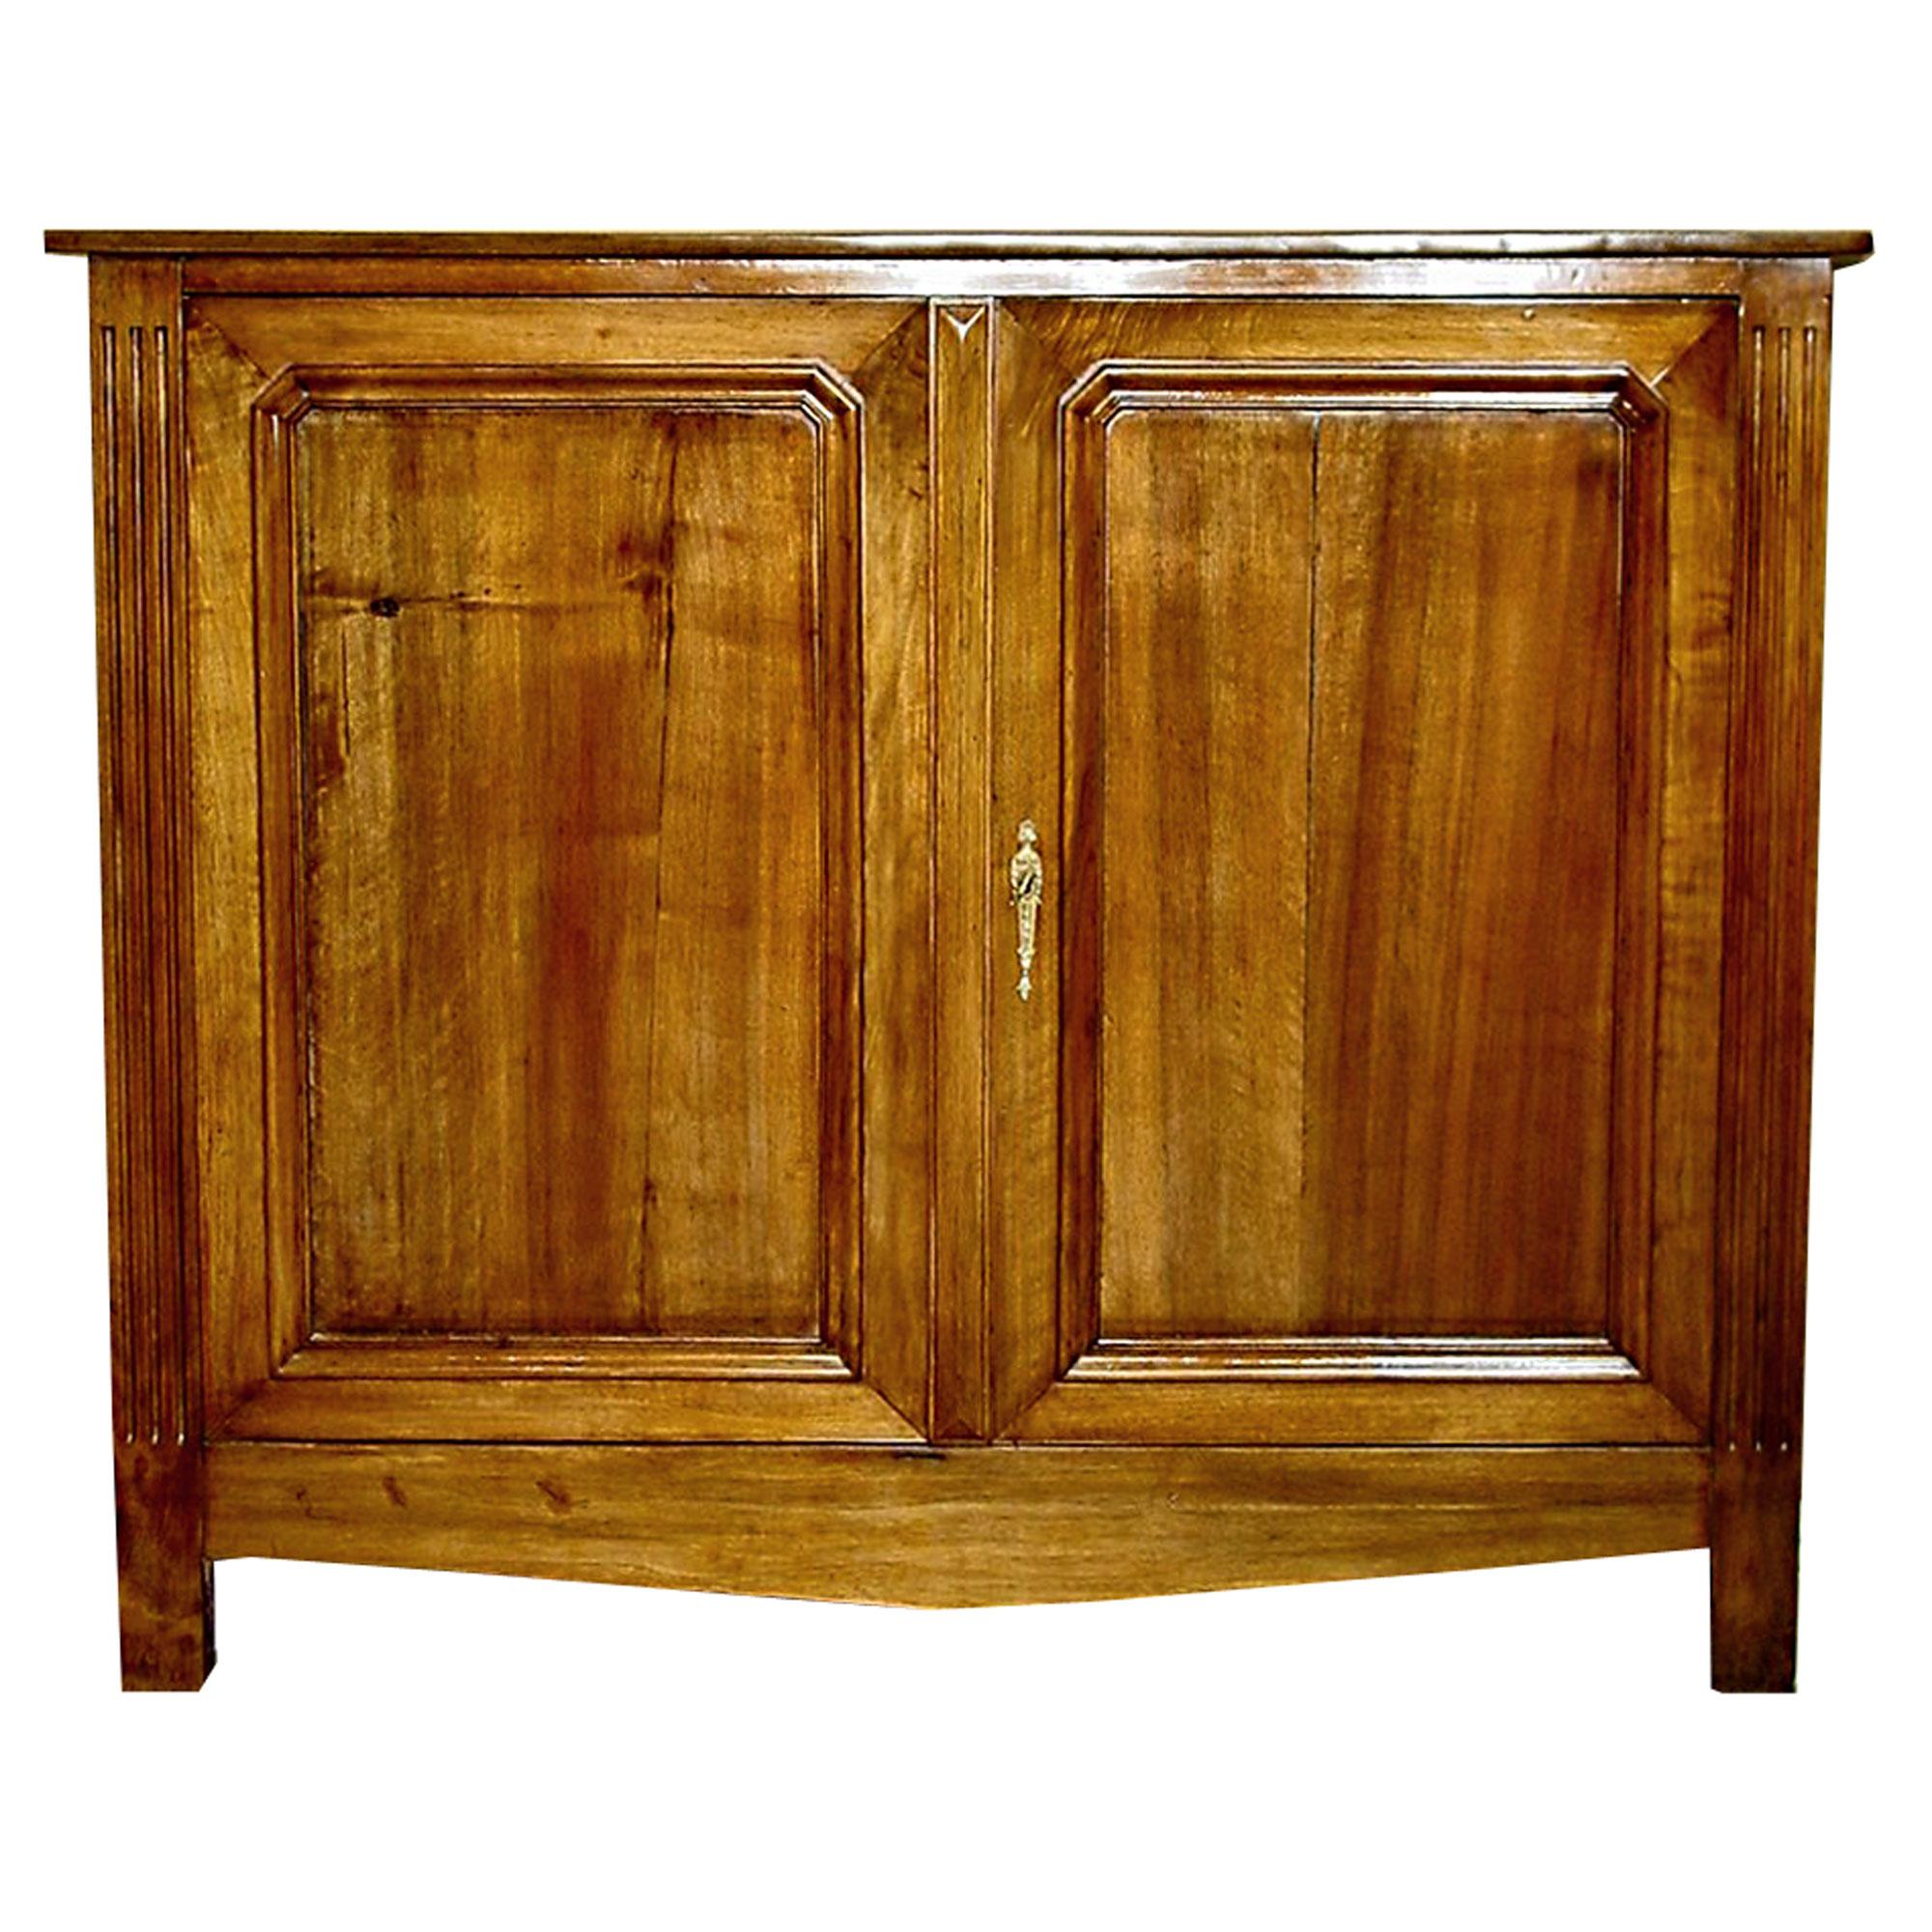 A French 19th Century French Louis XVI st. light Cherry corner cabinet with two doors. The doors with all original hardware have a rectangular moulded border. The two ends have an elegant fluted design framing the two doors. The top has a fine